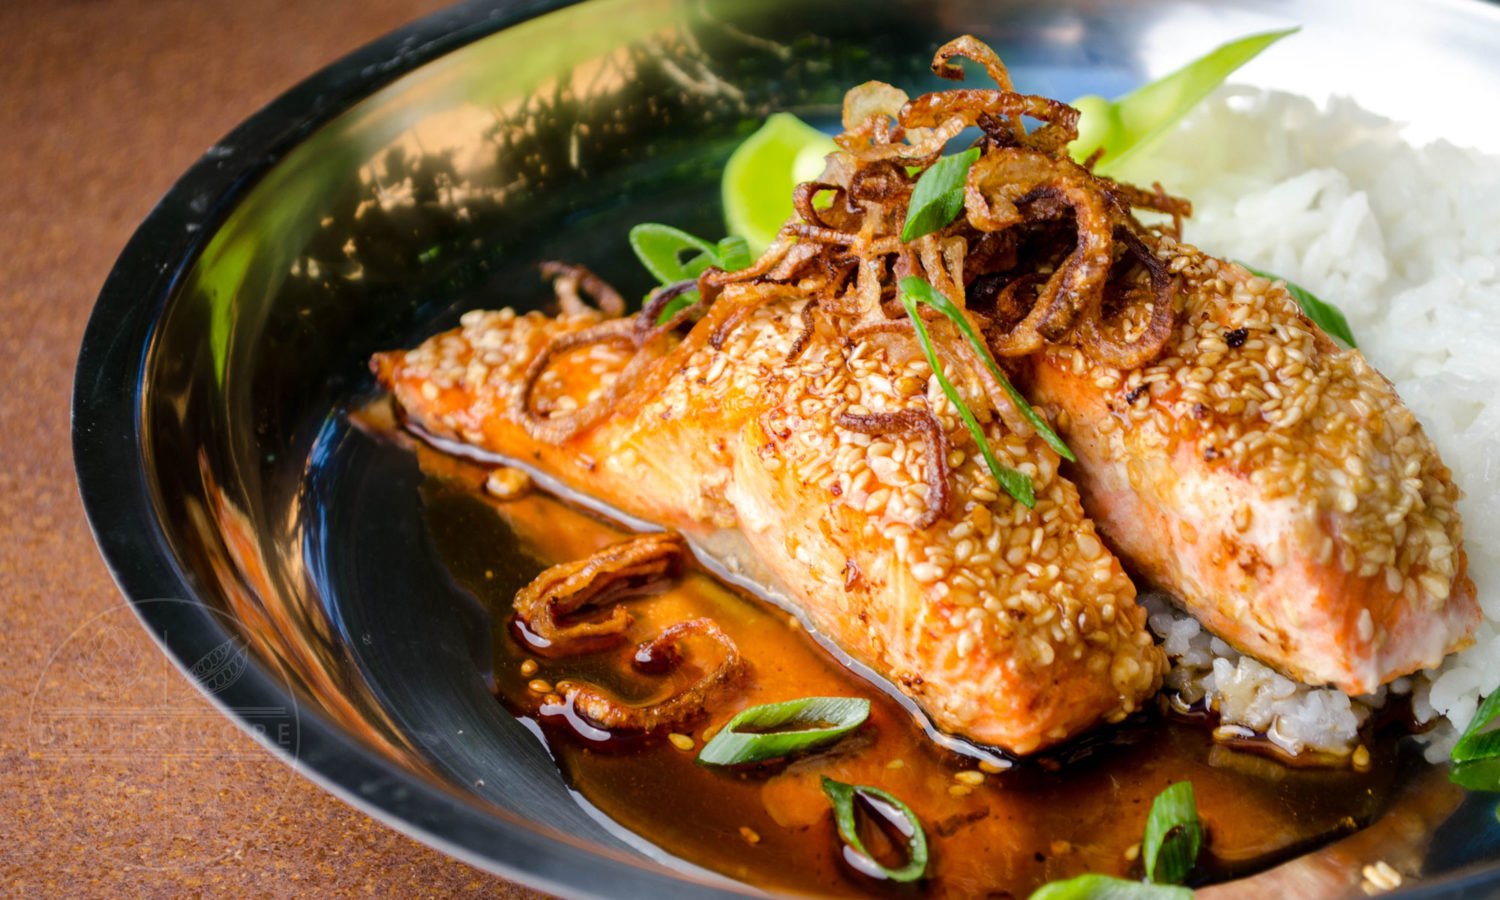 Sesame Salmon with Maple Soy Glaze, served with fried shallots and scallions - Diversivore.com